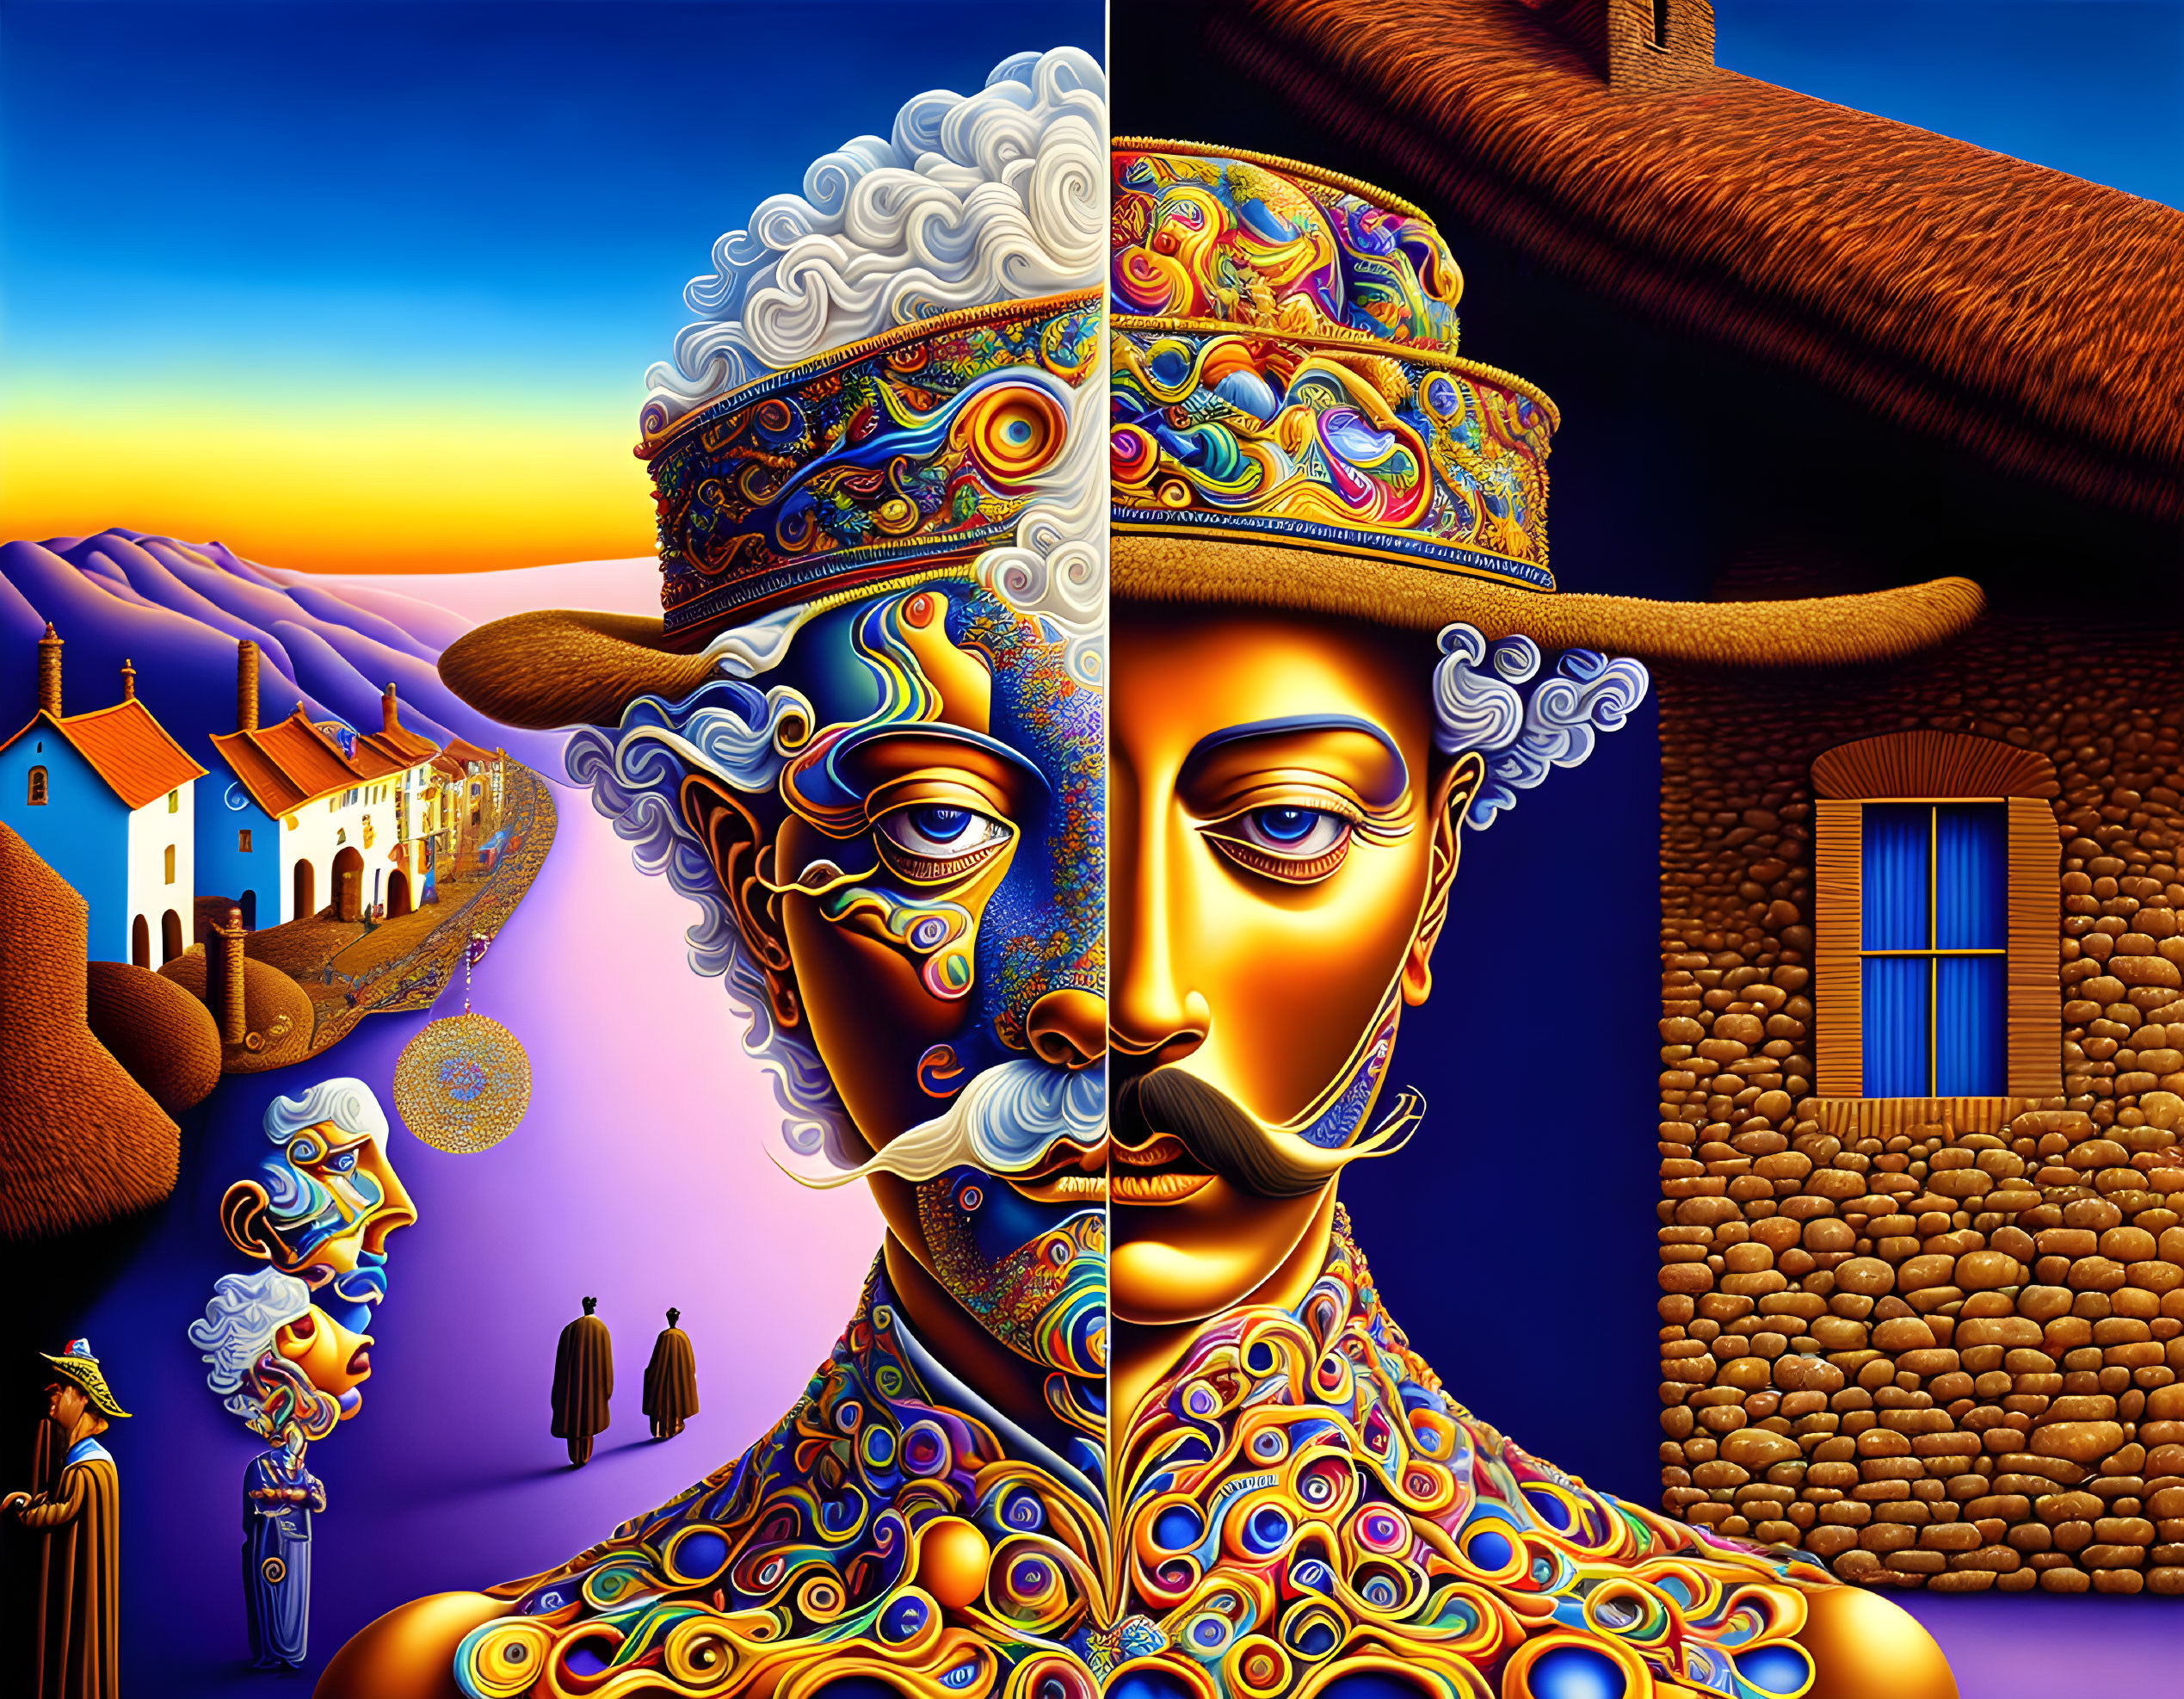 Split surreal portrait with ornate faces, European village and South-American hut backgrounds.